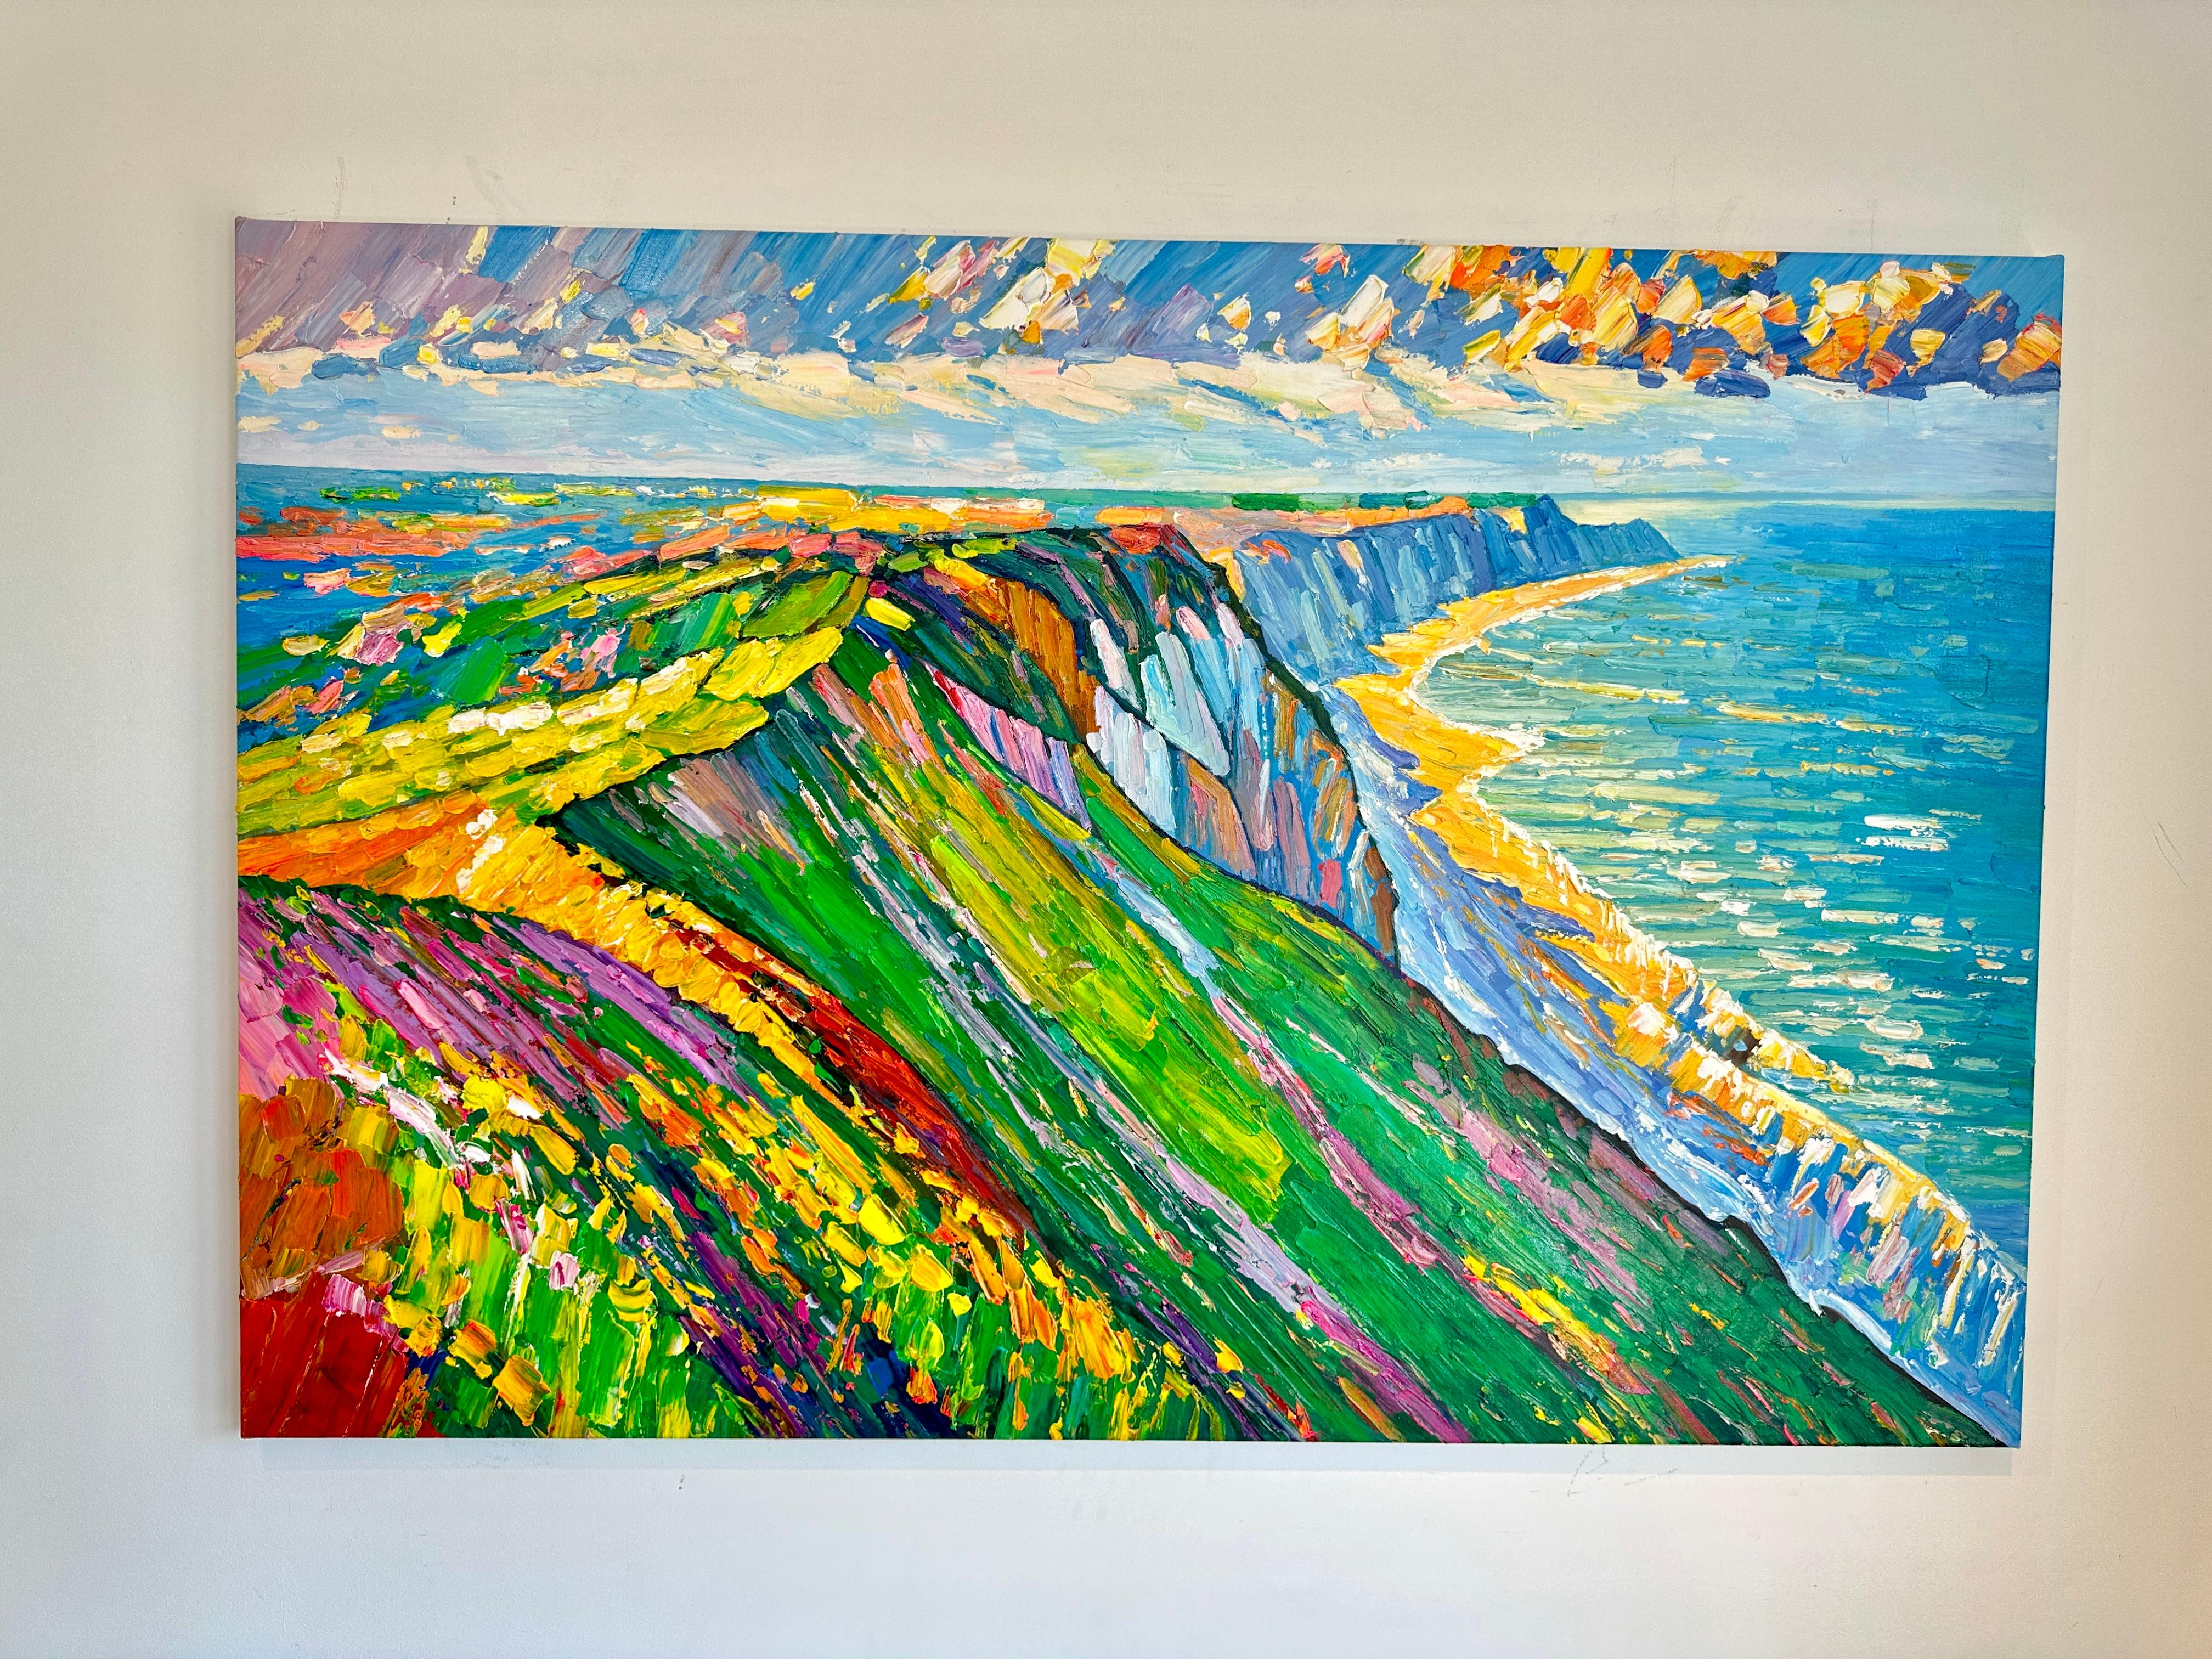 The Ocean's Roar  - Katharina Husslein Colorful Impasto Oil Landscape Painting For Sale 4